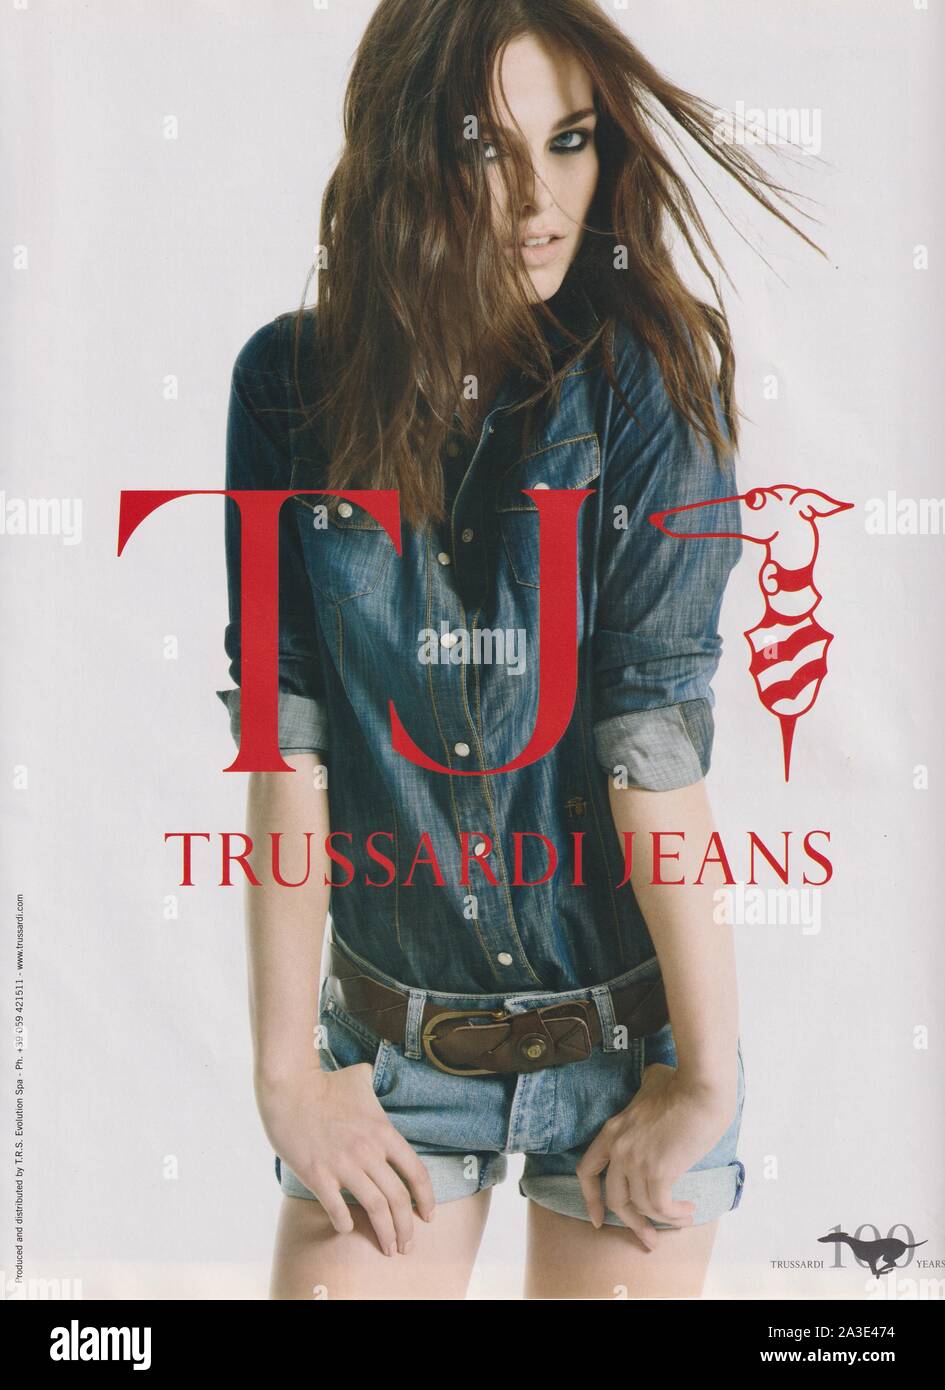 poster advertising Trussardi Jeans fashion house in paper magazine from  2011, advertisement, creative Tru Trussardi 2010s advert Stock Photo - Alamy